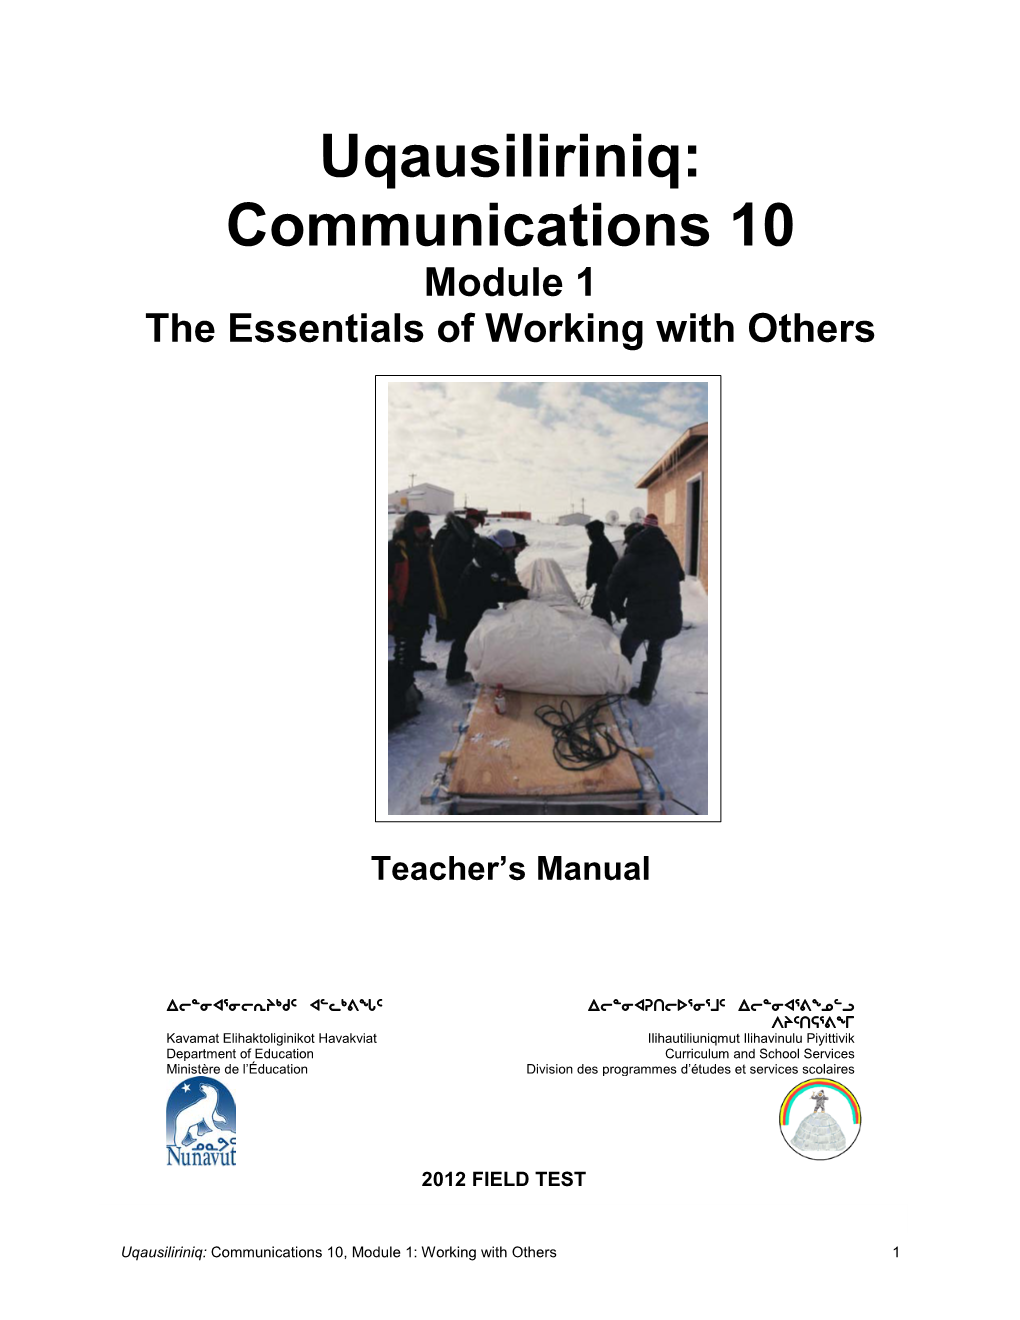 Module 1 the Essentials of Working with Others